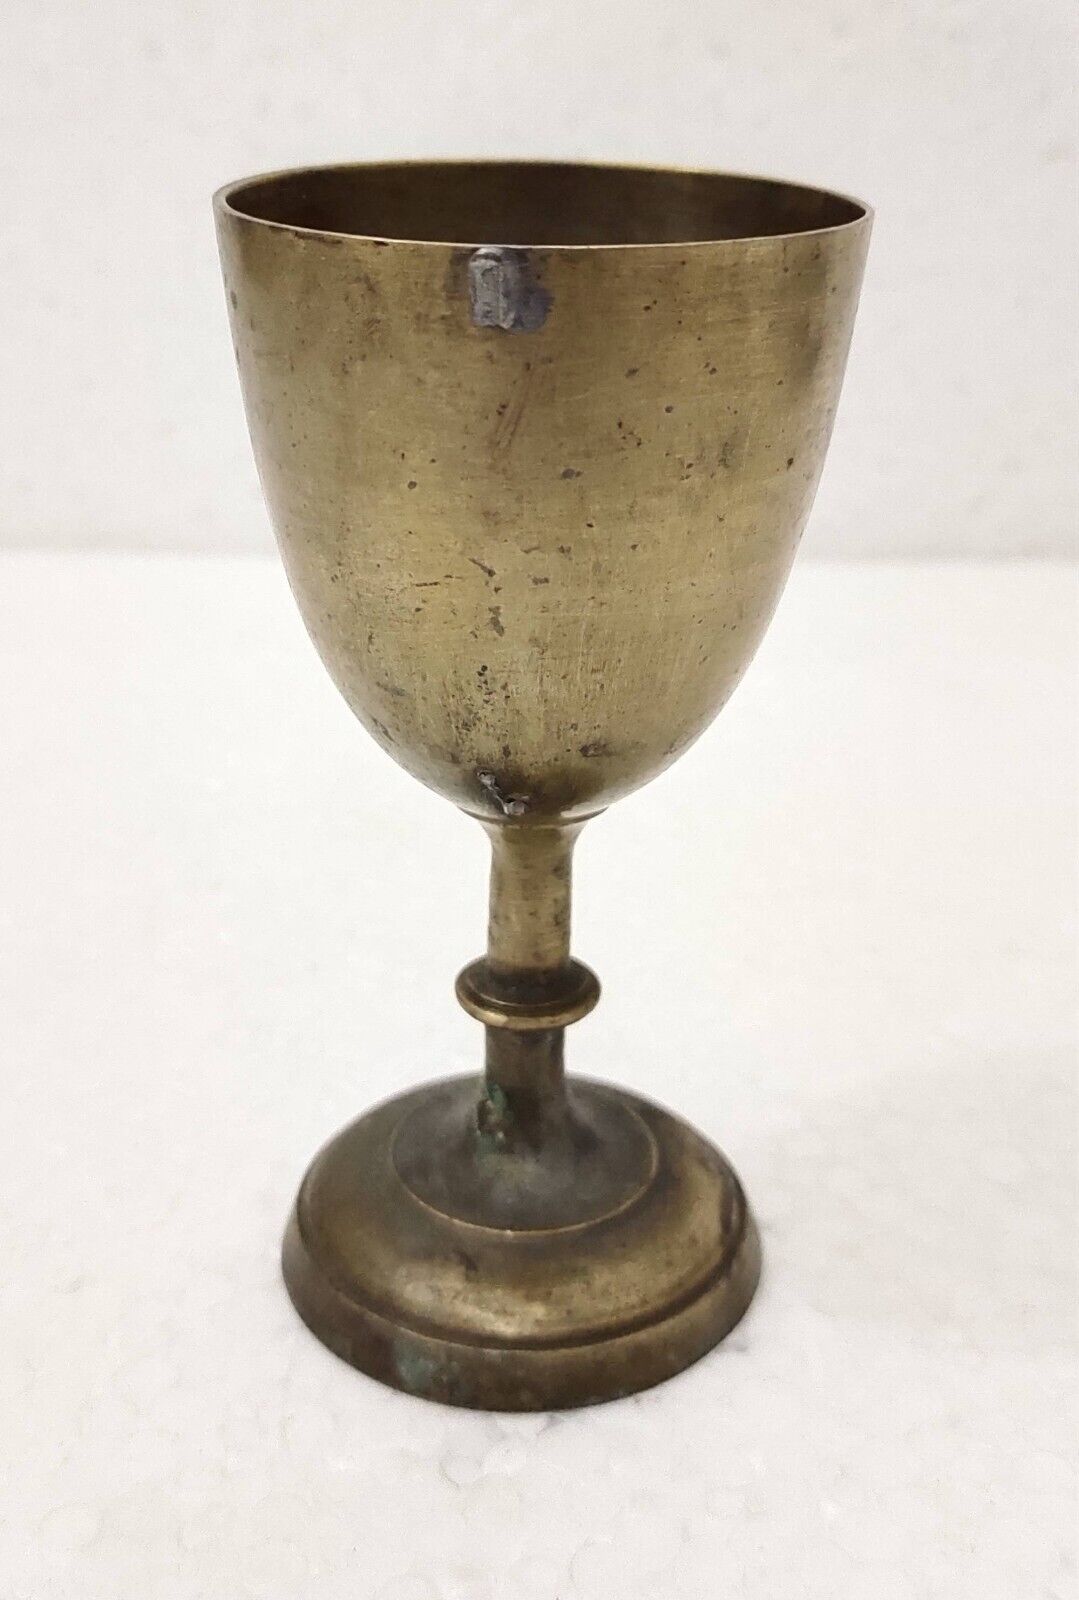 Vintage Beautiful Handmade Brass Drinking Glass For Water, Juices Or Wine